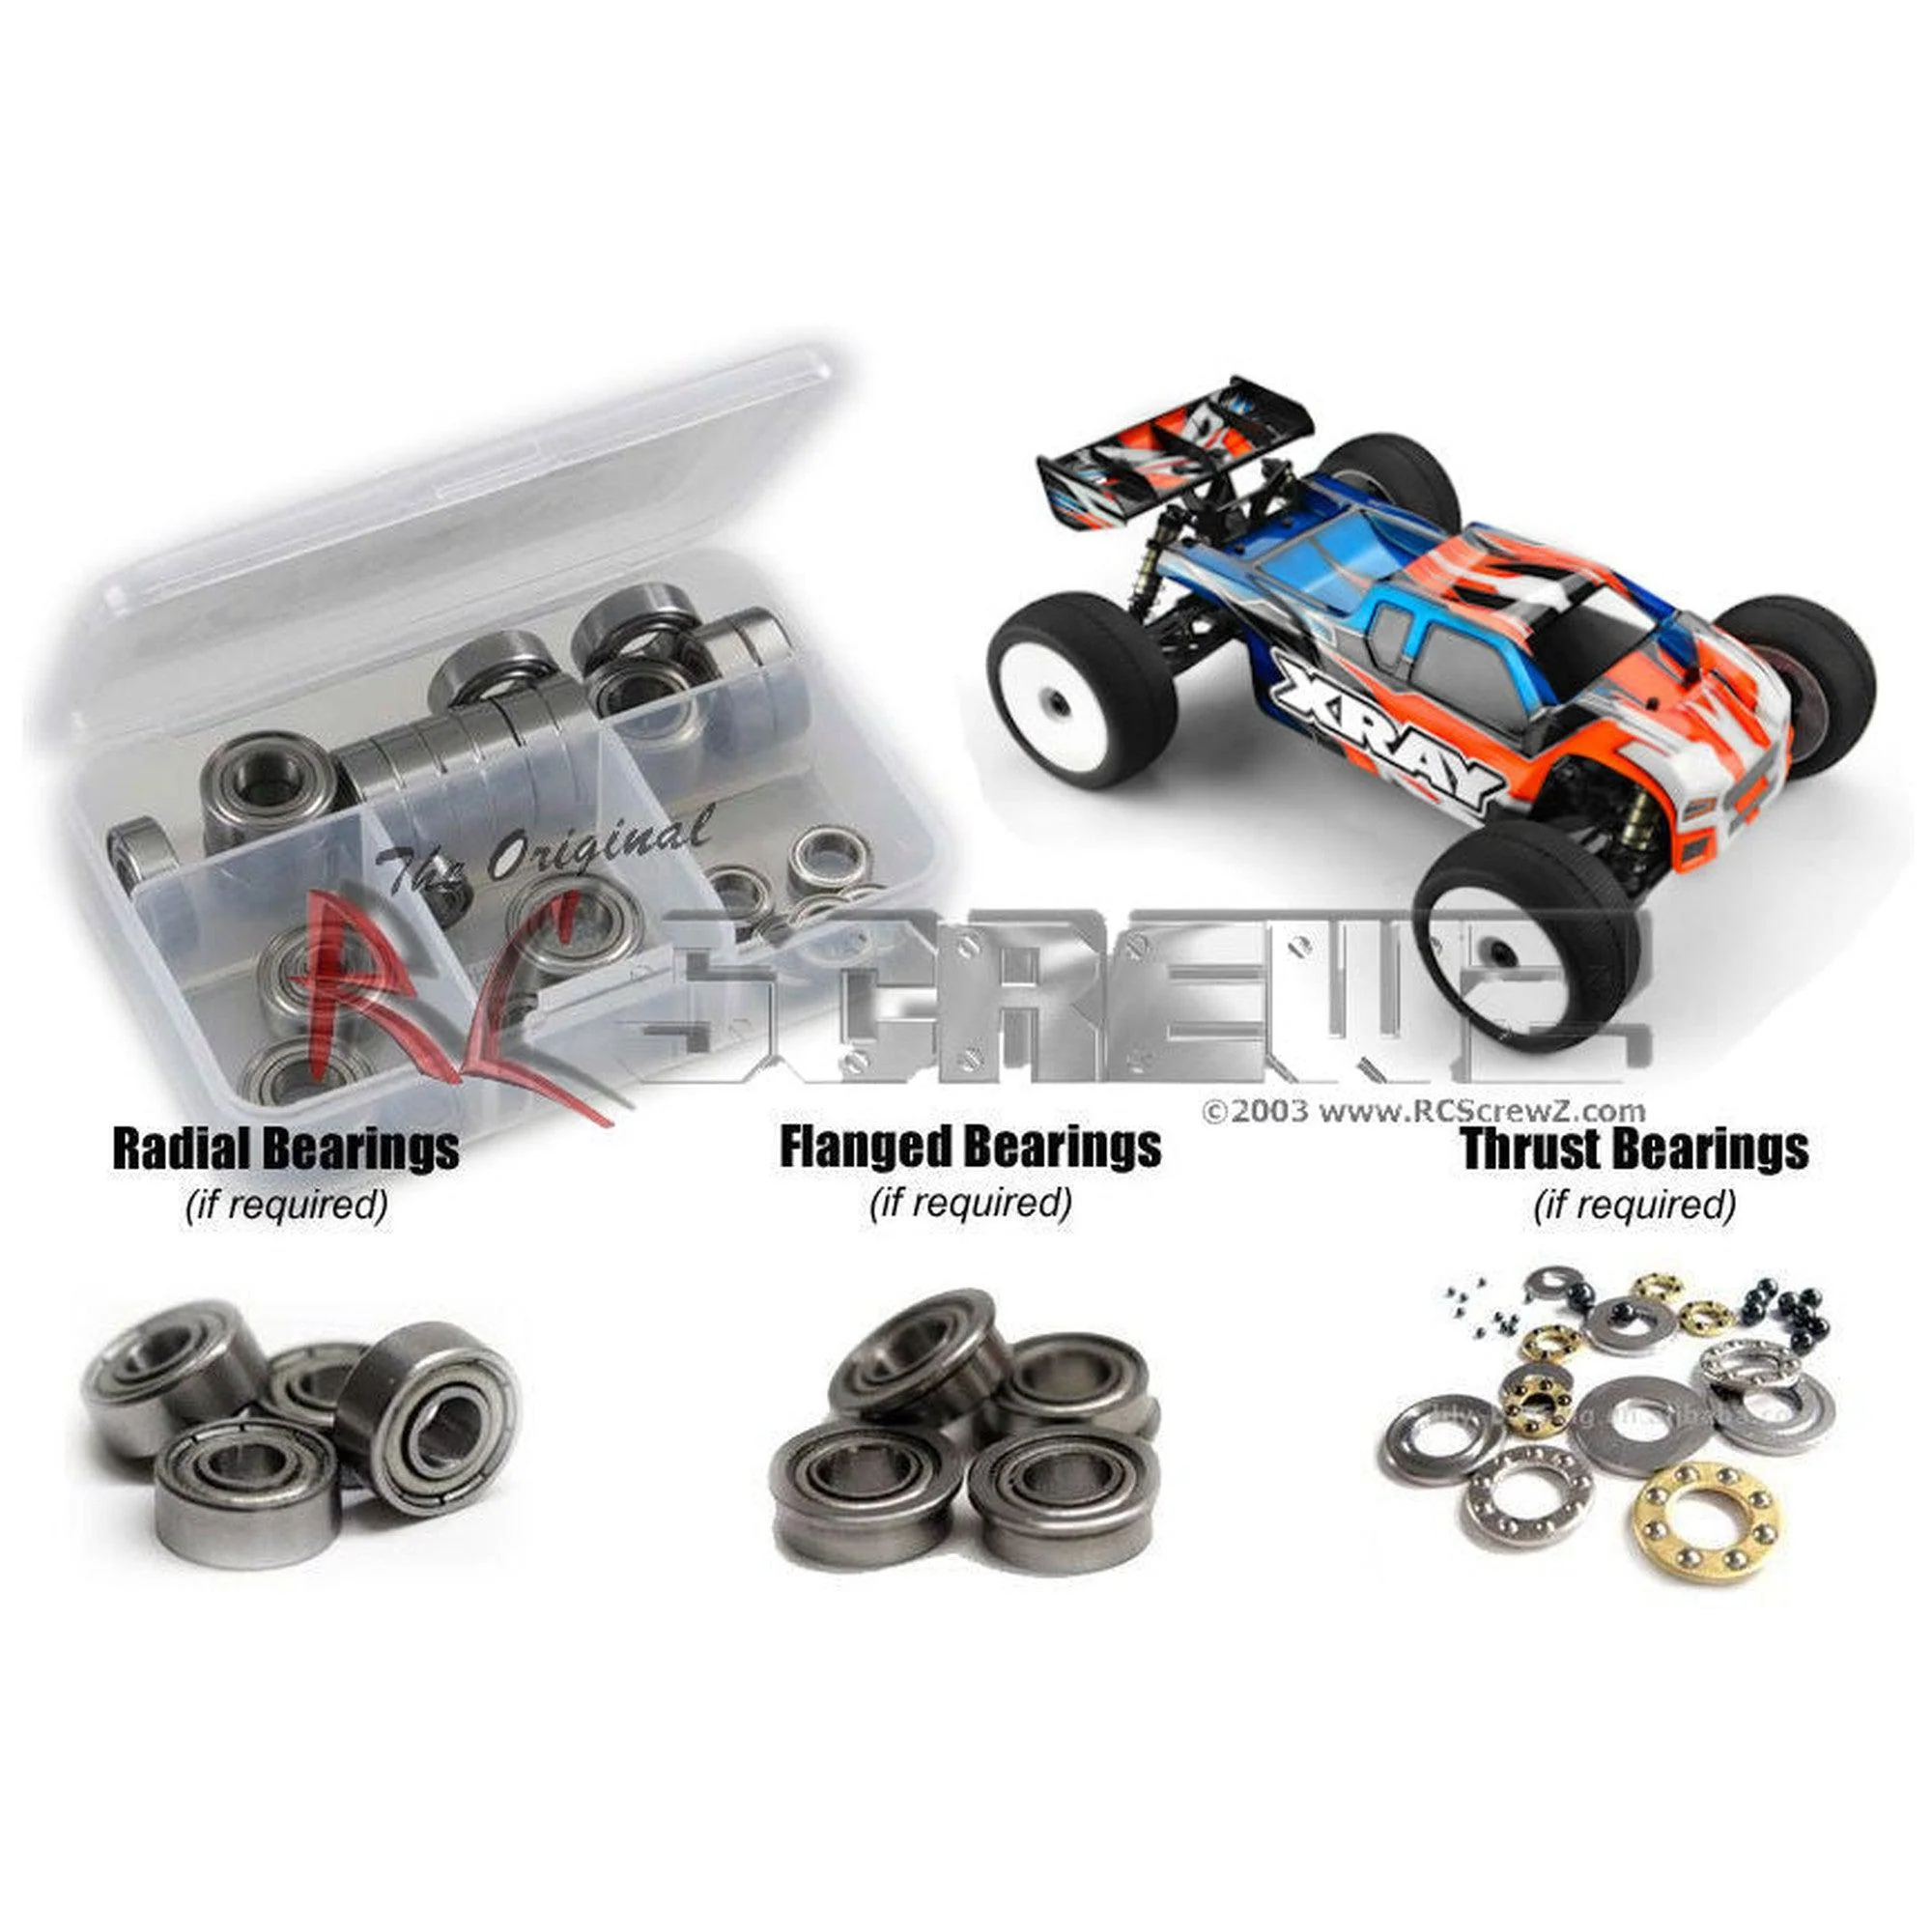 RCScrewZ Metal Shielded Bearing Kit xra079b for XRAY XT8e '22 Truggy 1/8 #350301 - Picture 1 of 12